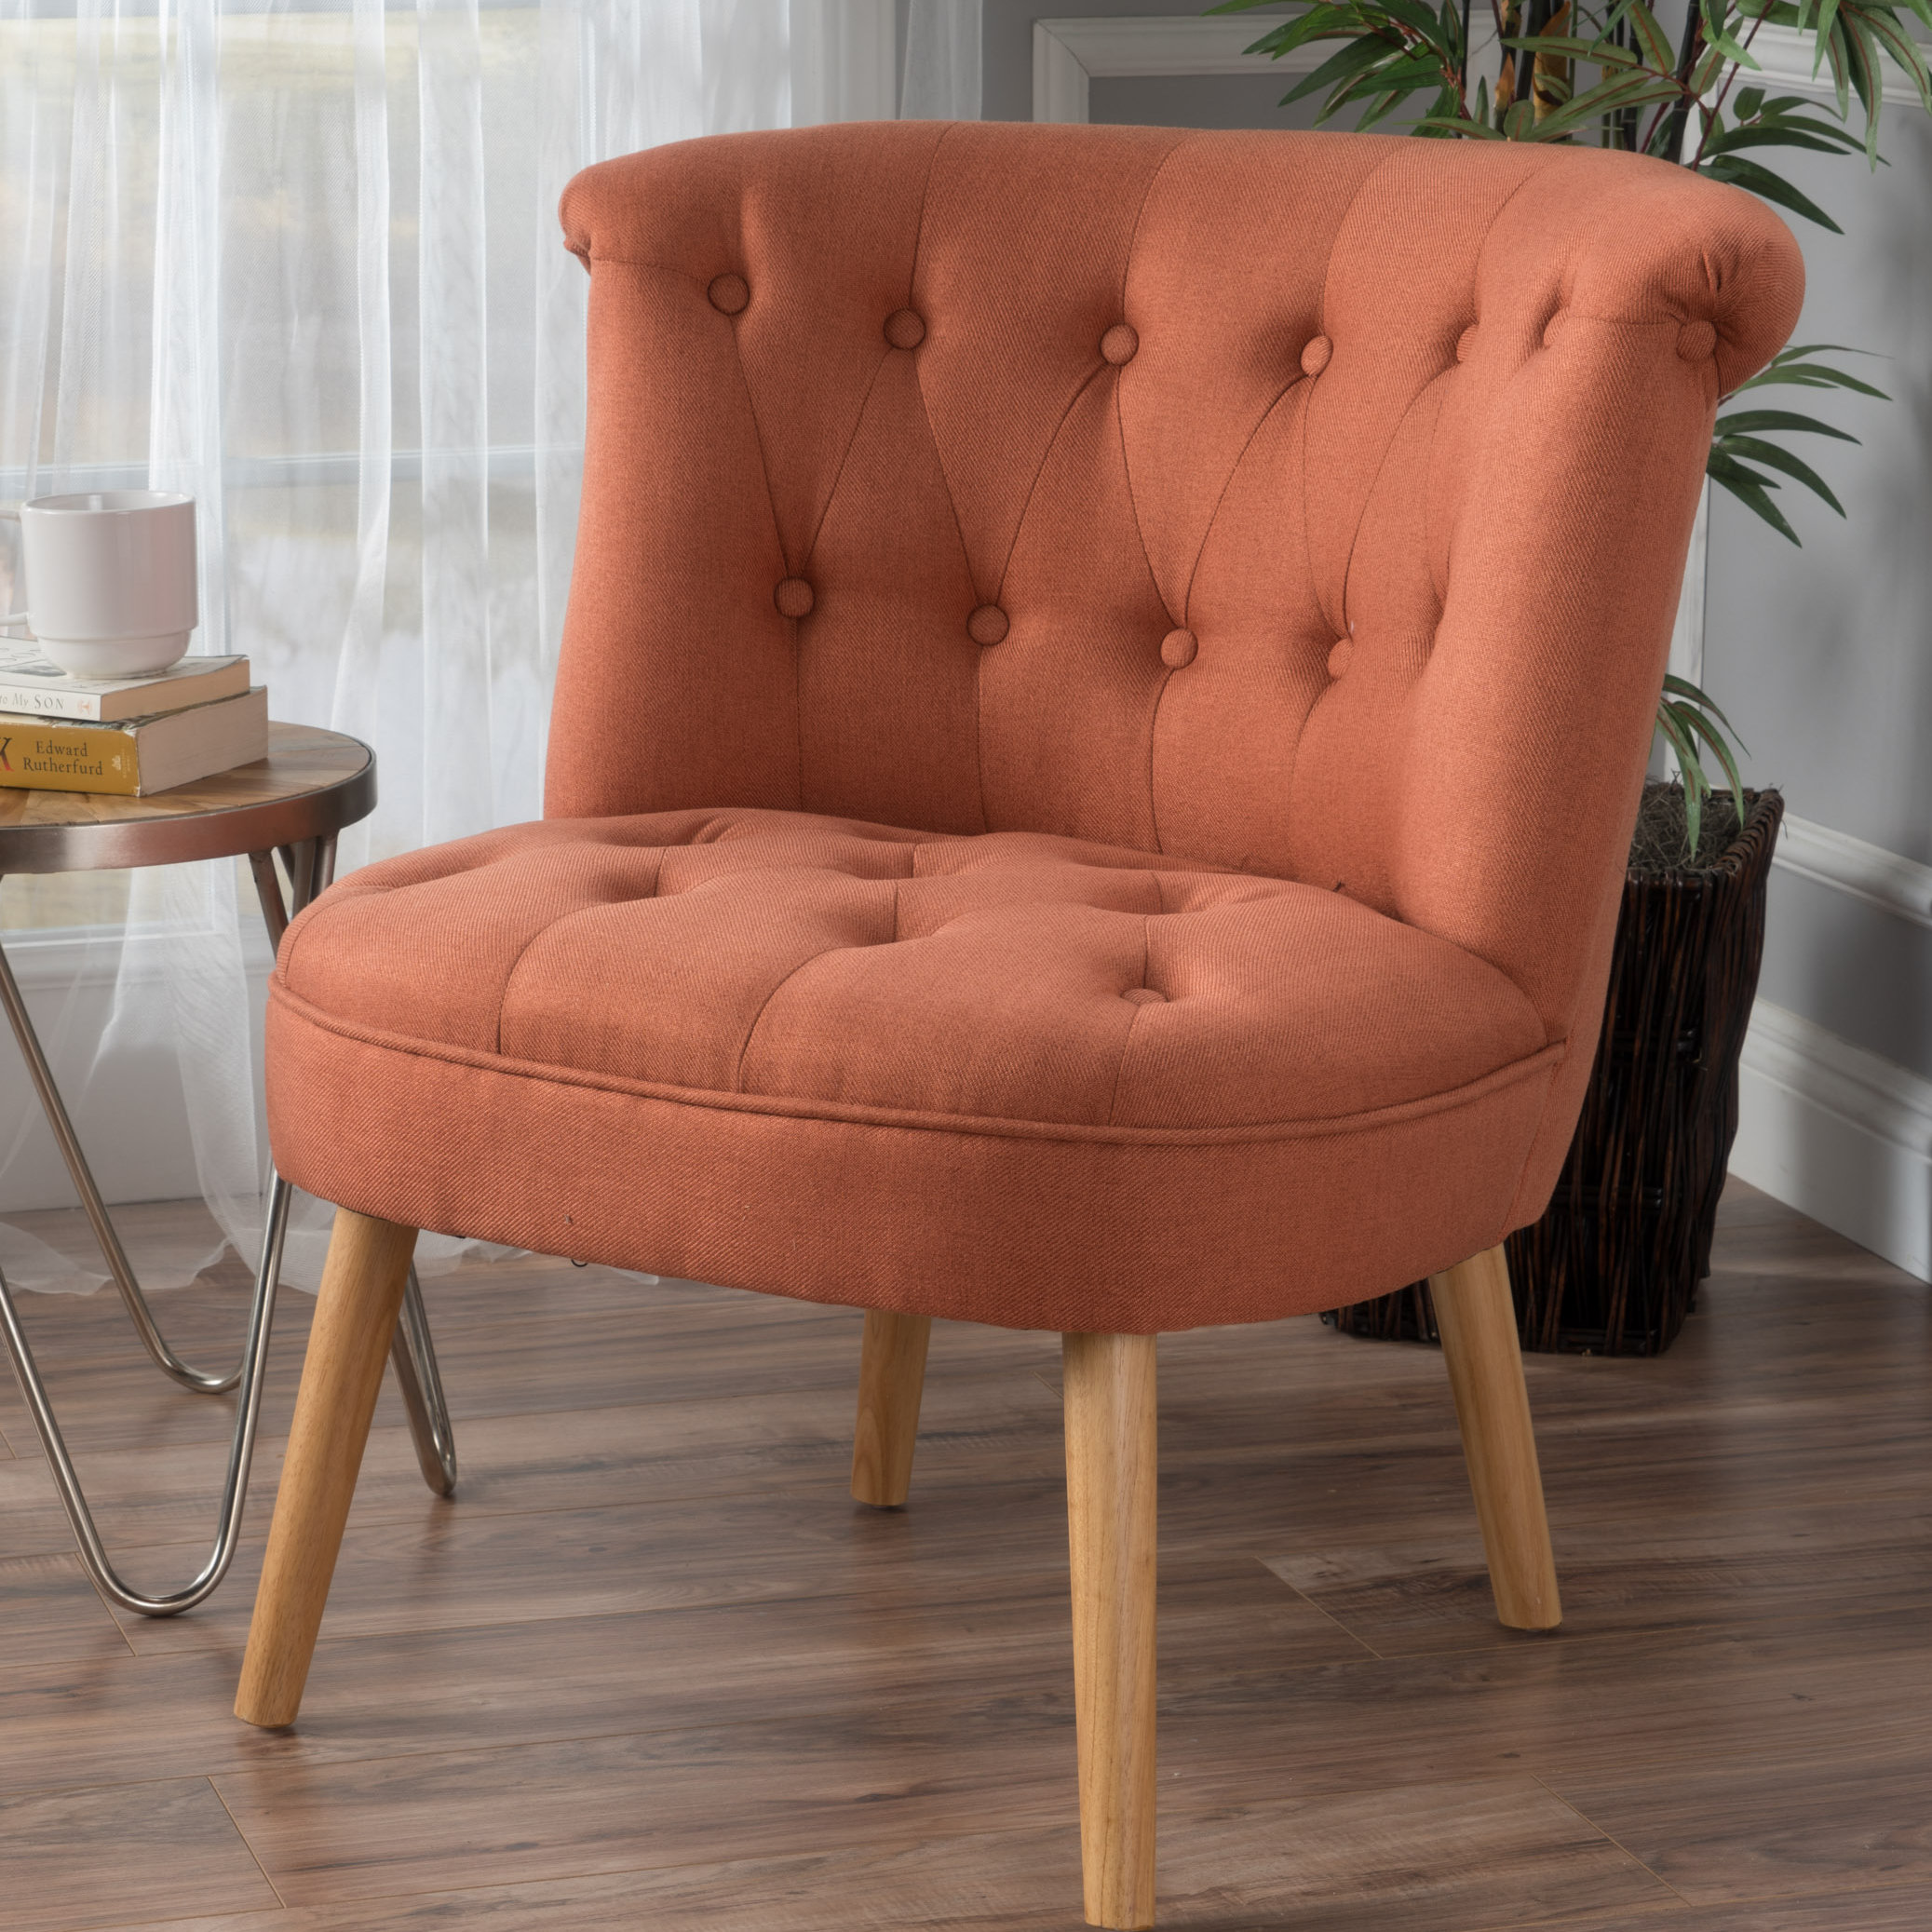 Hungerford 29” Wide Tufted Side Chair